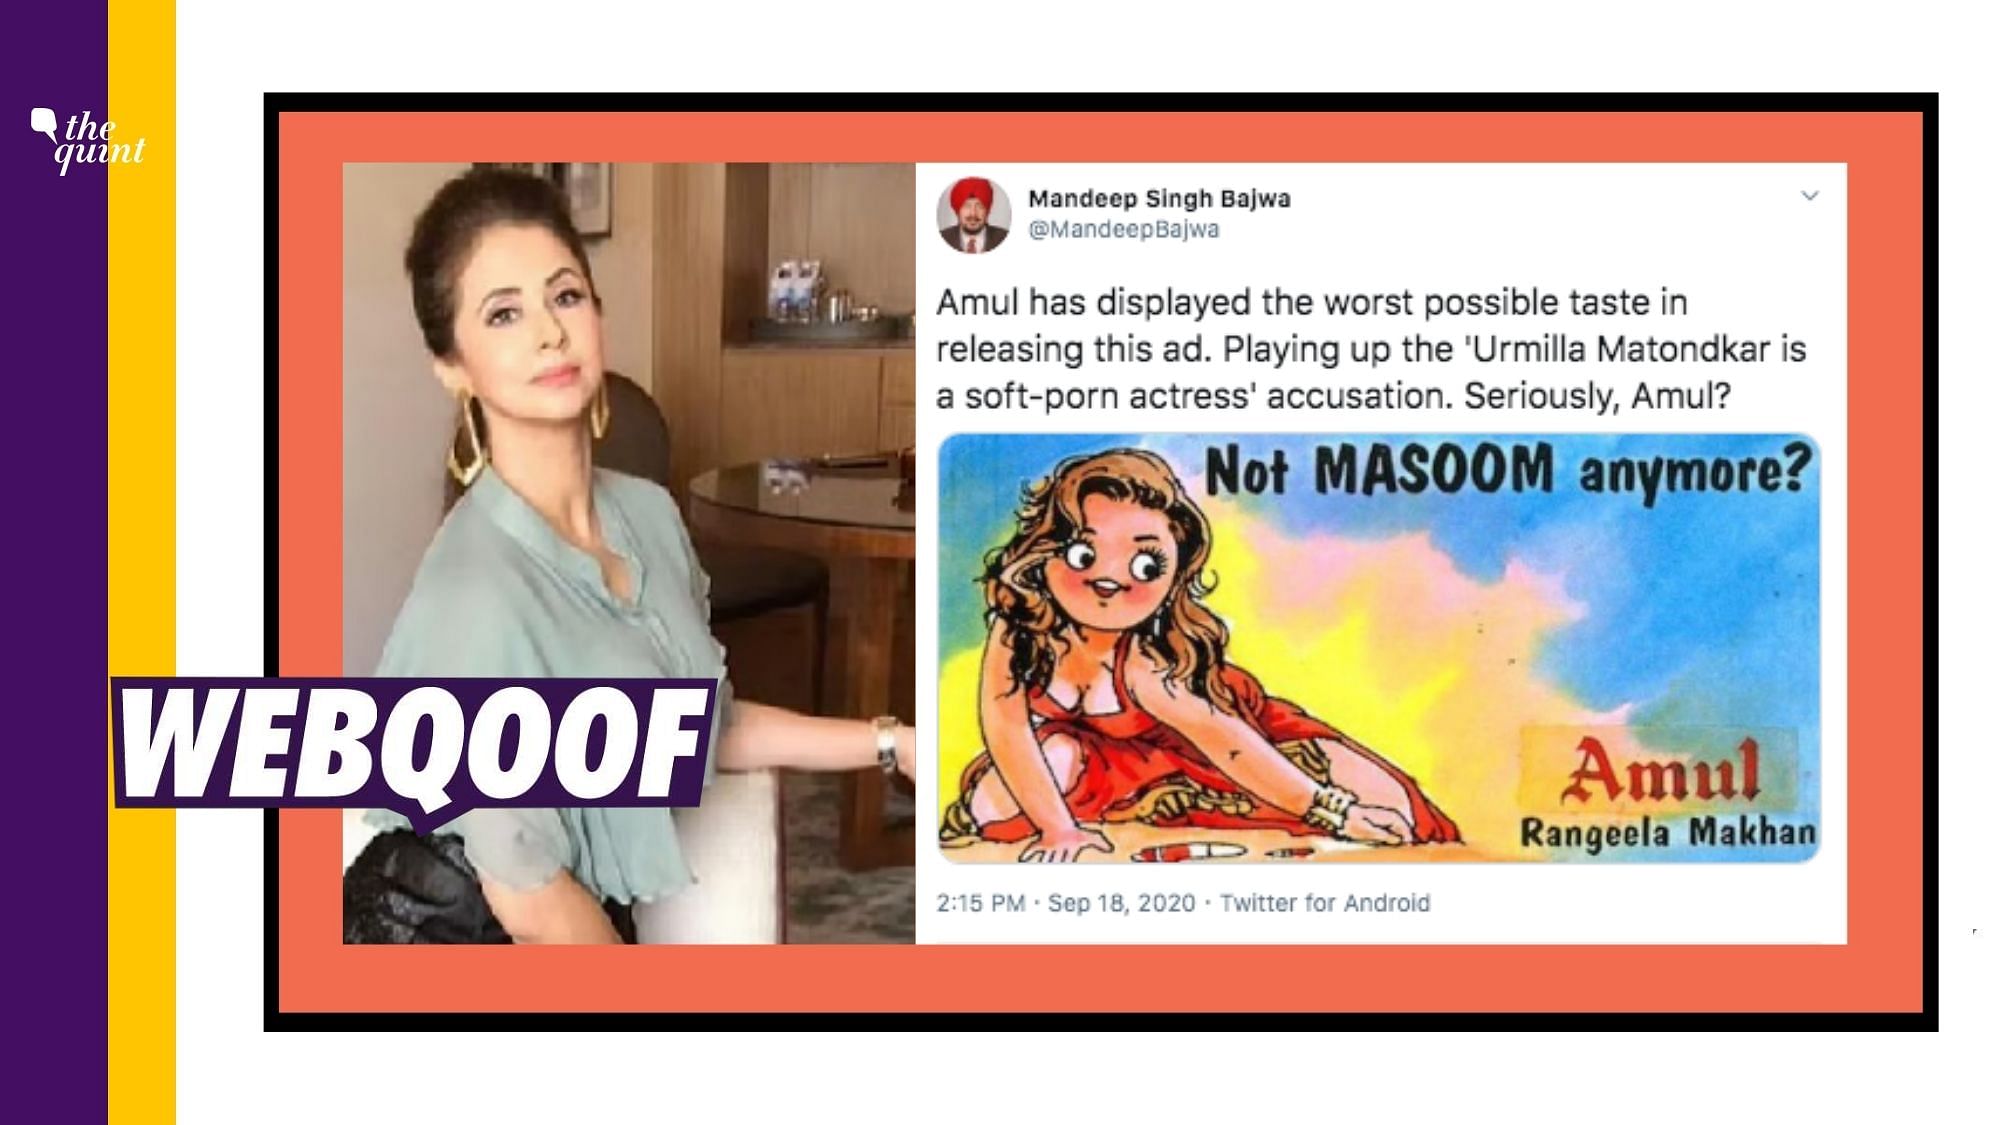 An old advertisement created by Amul in 1995 has been revived to claim that it’s recent and is falsely being linked to the controversy involving Urmila Matondkar and Kangana Ranaut.